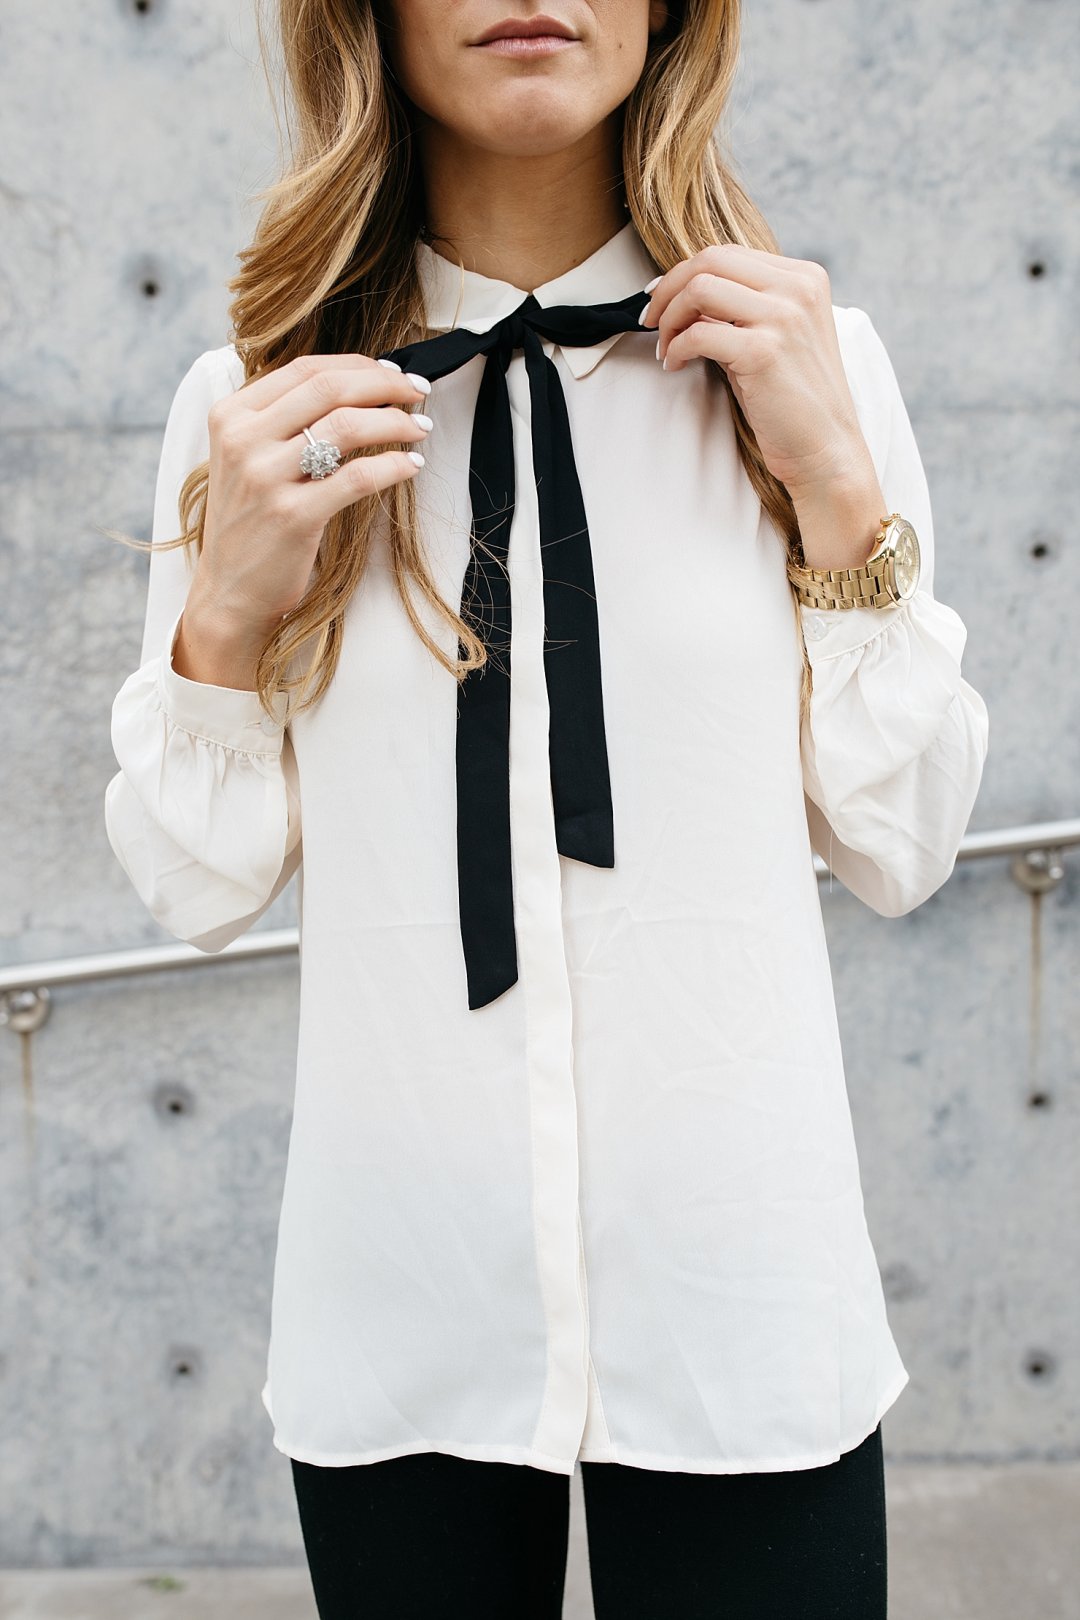 business casual outfit, what to wear to work, fall work outfit idea, office wear, work wear, outfit loafers, pussy bow blouse, summer work outfit idea, wear to work, off white blouse, black and white work outfit idea